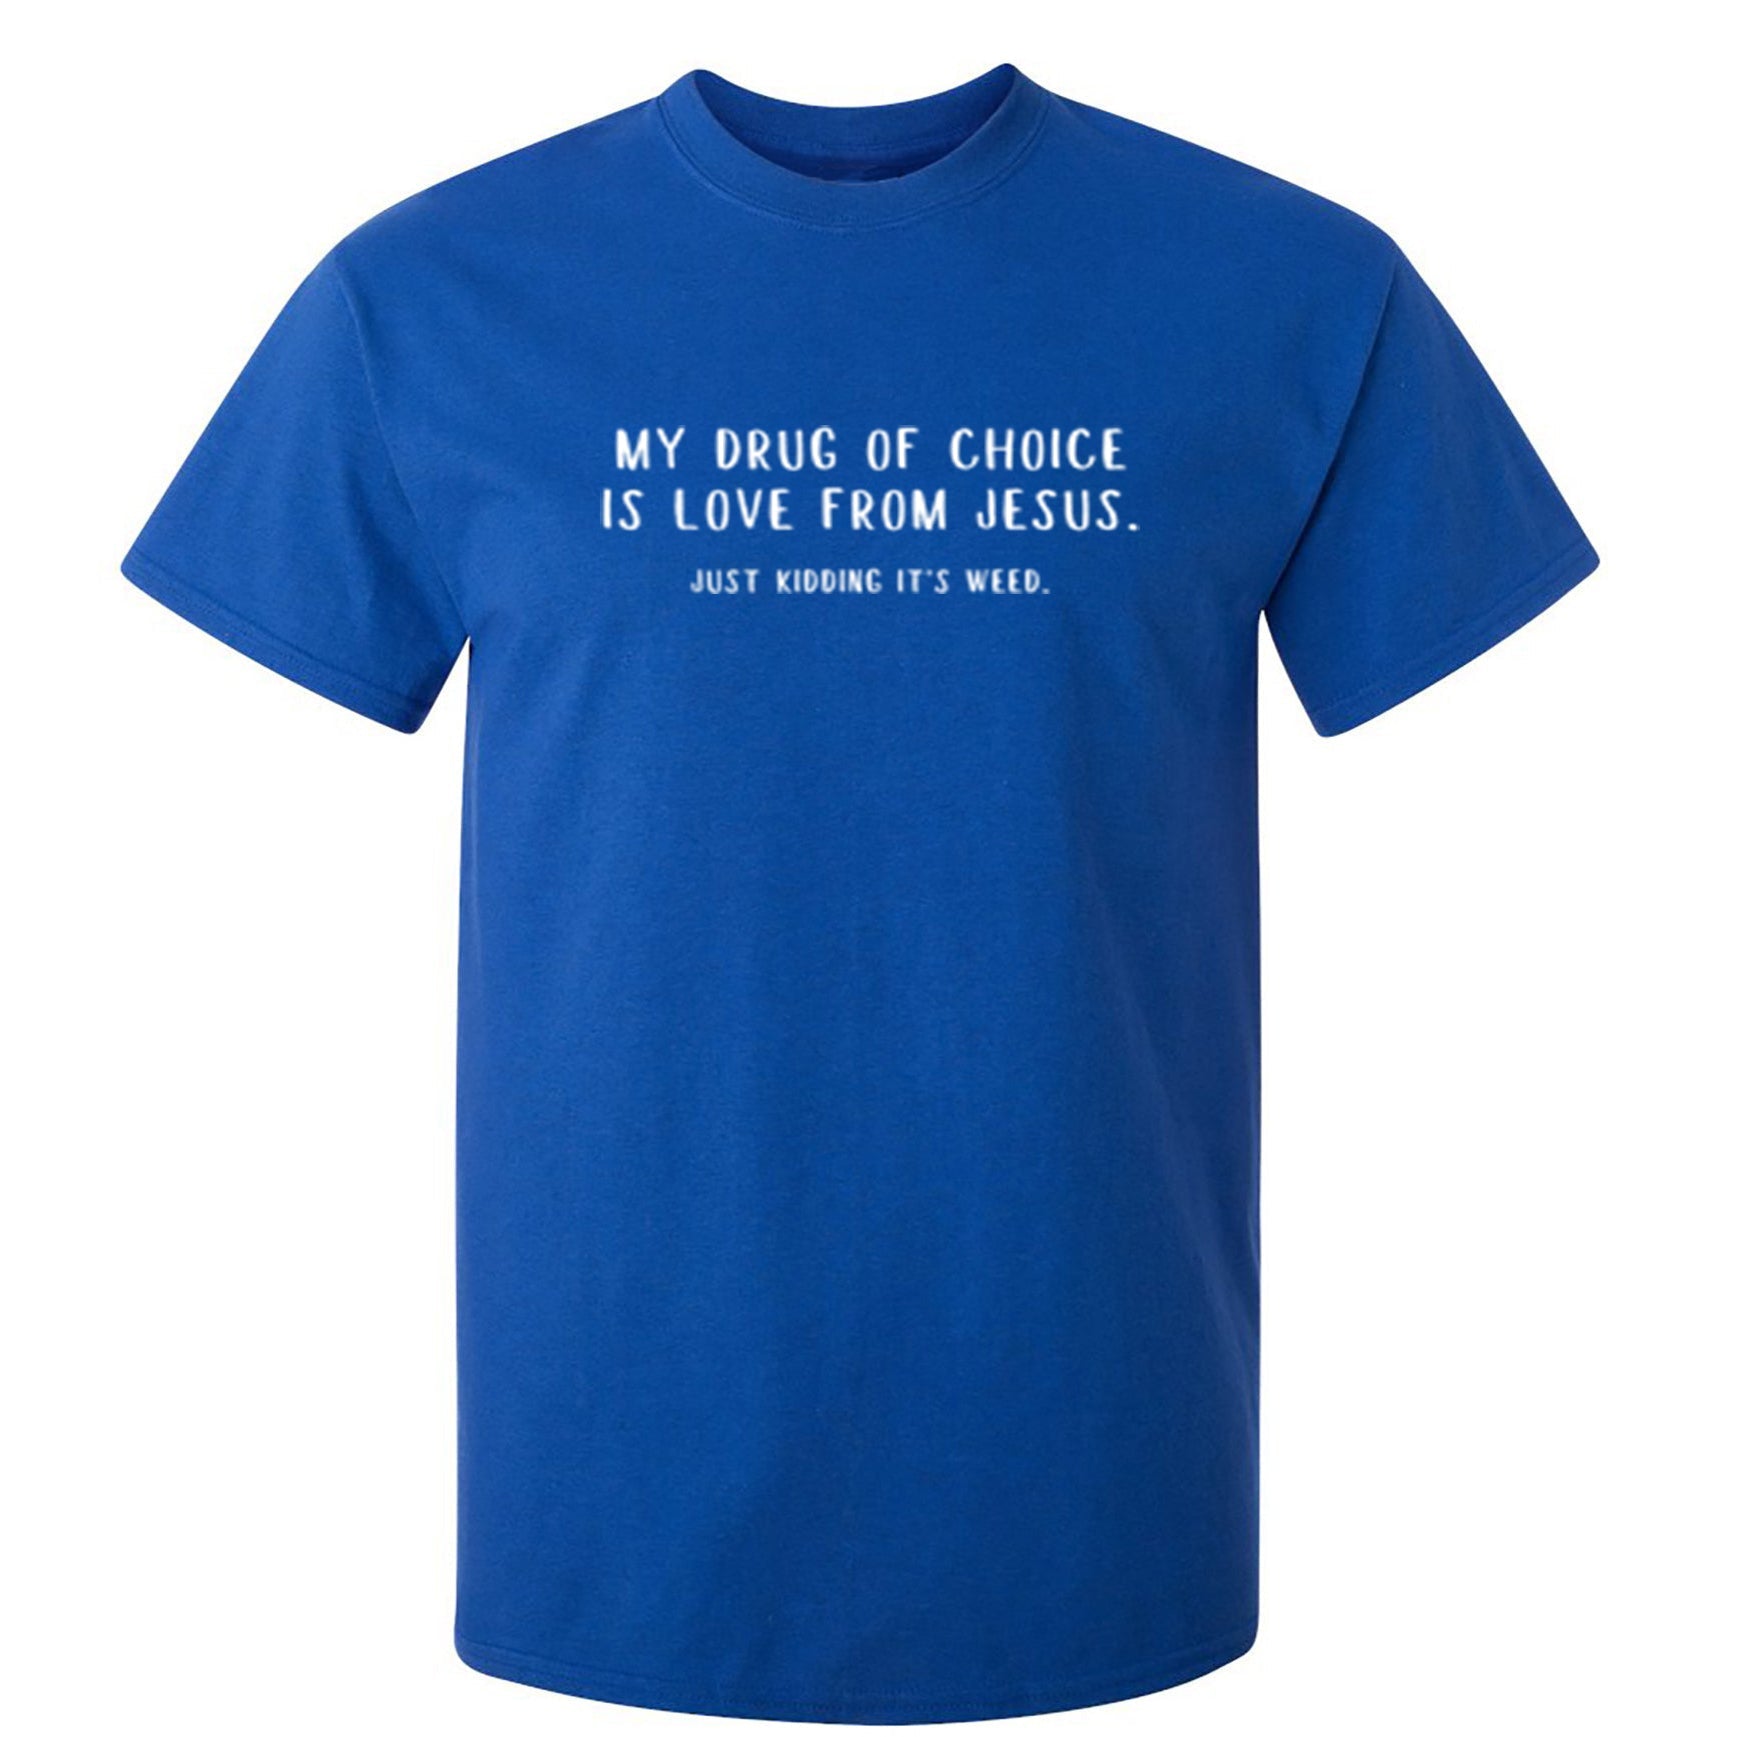 My Drug Of Choice iS Love From Jesus. J... - Funny Tee